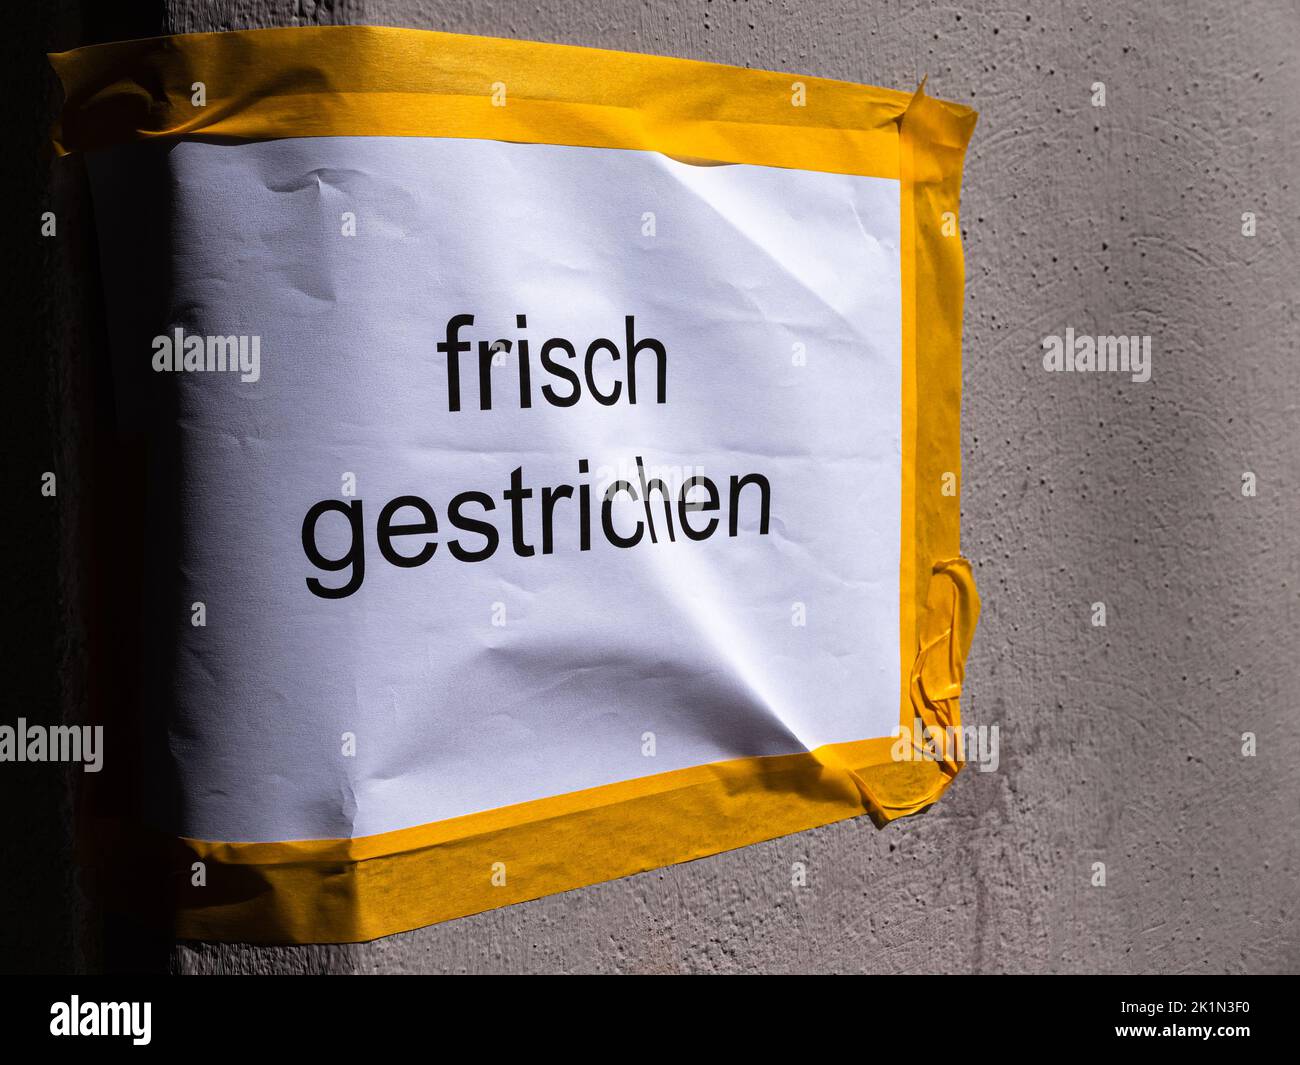 German inscription on the wall: Frisch gestrichen. English translation: Freshly painted Stock Photo